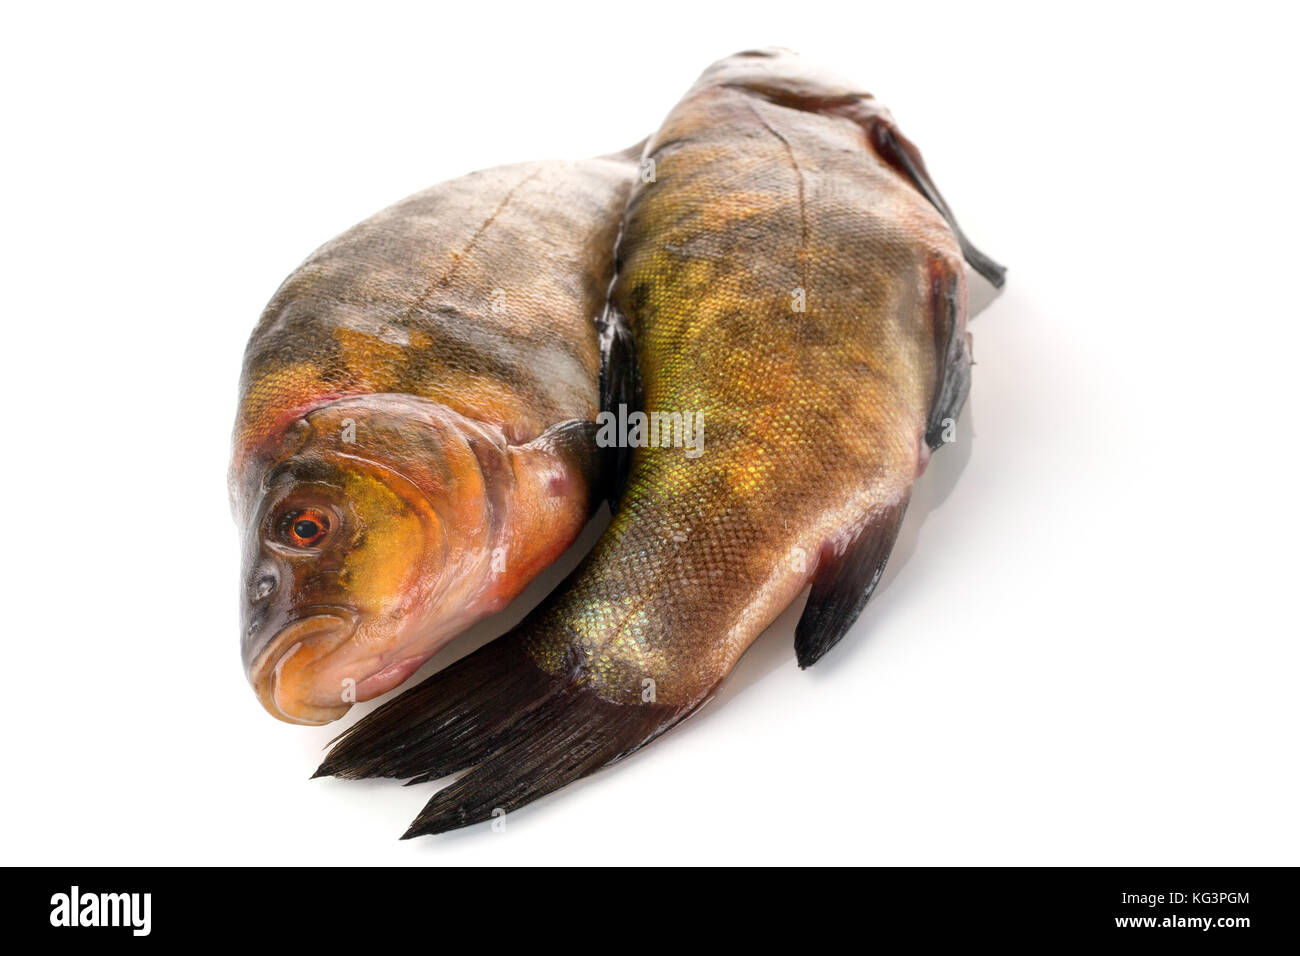 Two fresh fishes on a white background. Two carcasses of a tench with golden-green scales, the heads in opposite the parties, are isolated on white. Stock Photo